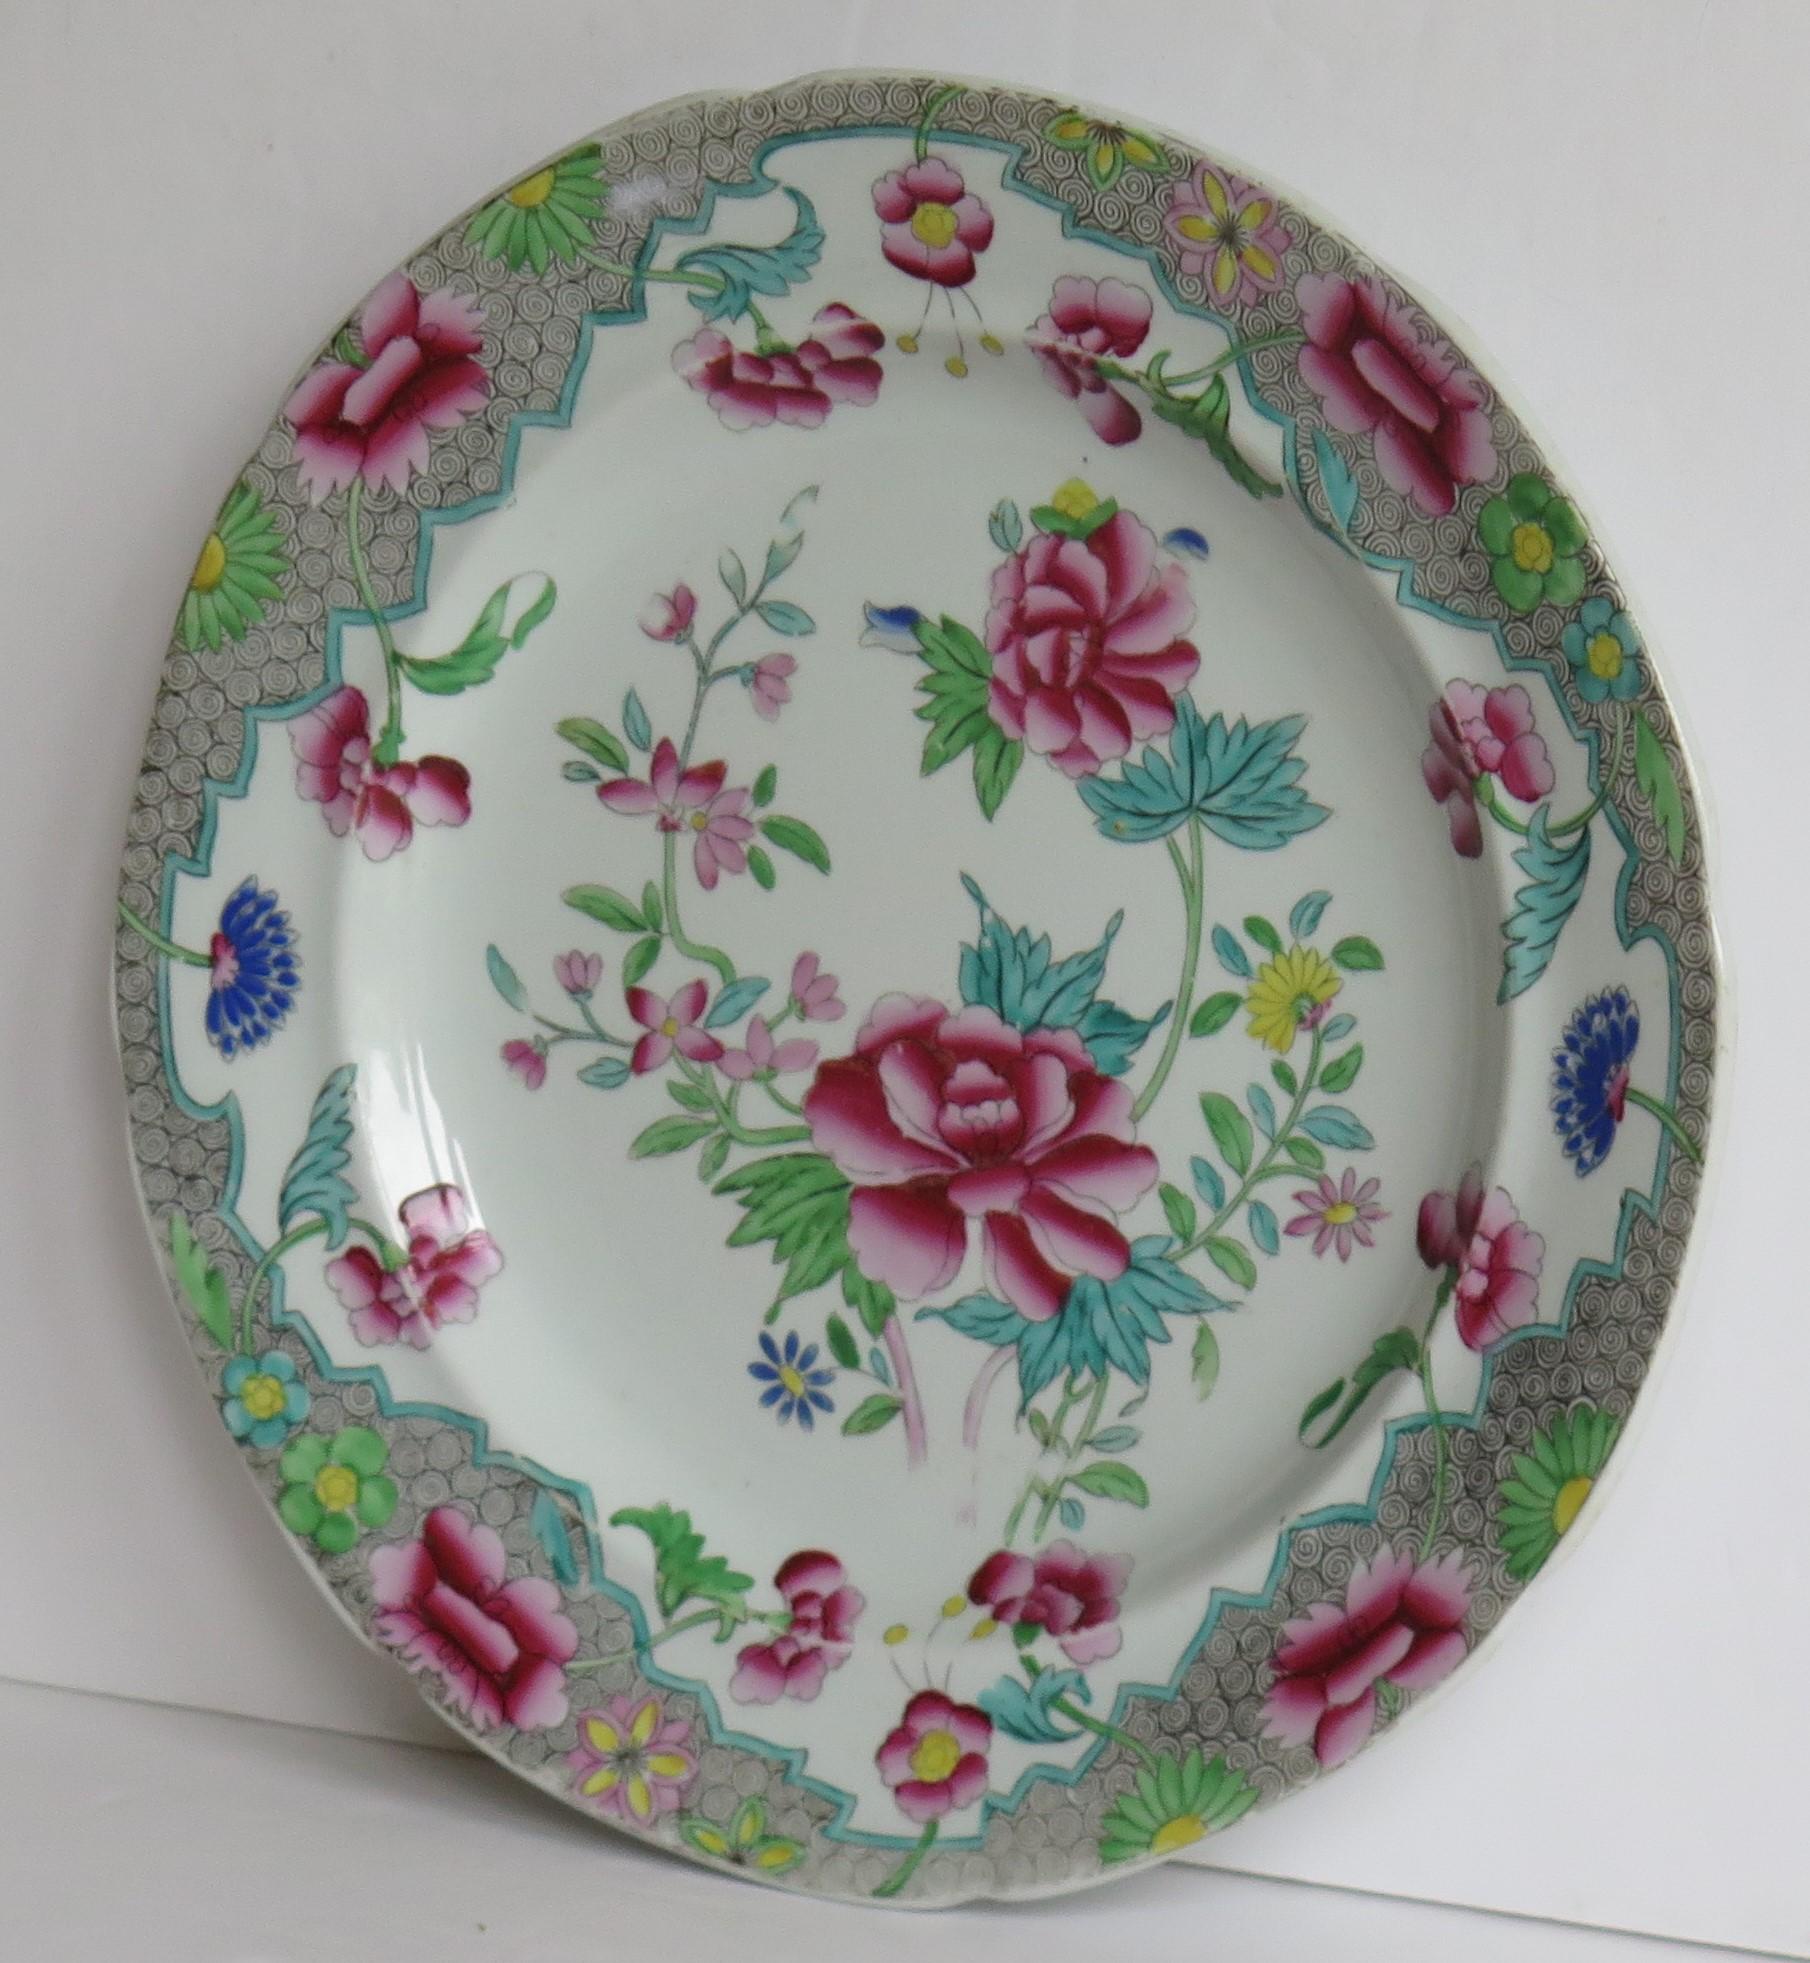 This is a good ironstone side plate in hand painted floral pattern No. 8, made by Hicks and Meigh of Shelton, Staffordshire, England between 1812 and 1822, circa 1815.

The plate is well potted with a notched edge to the rim.

The plate has been